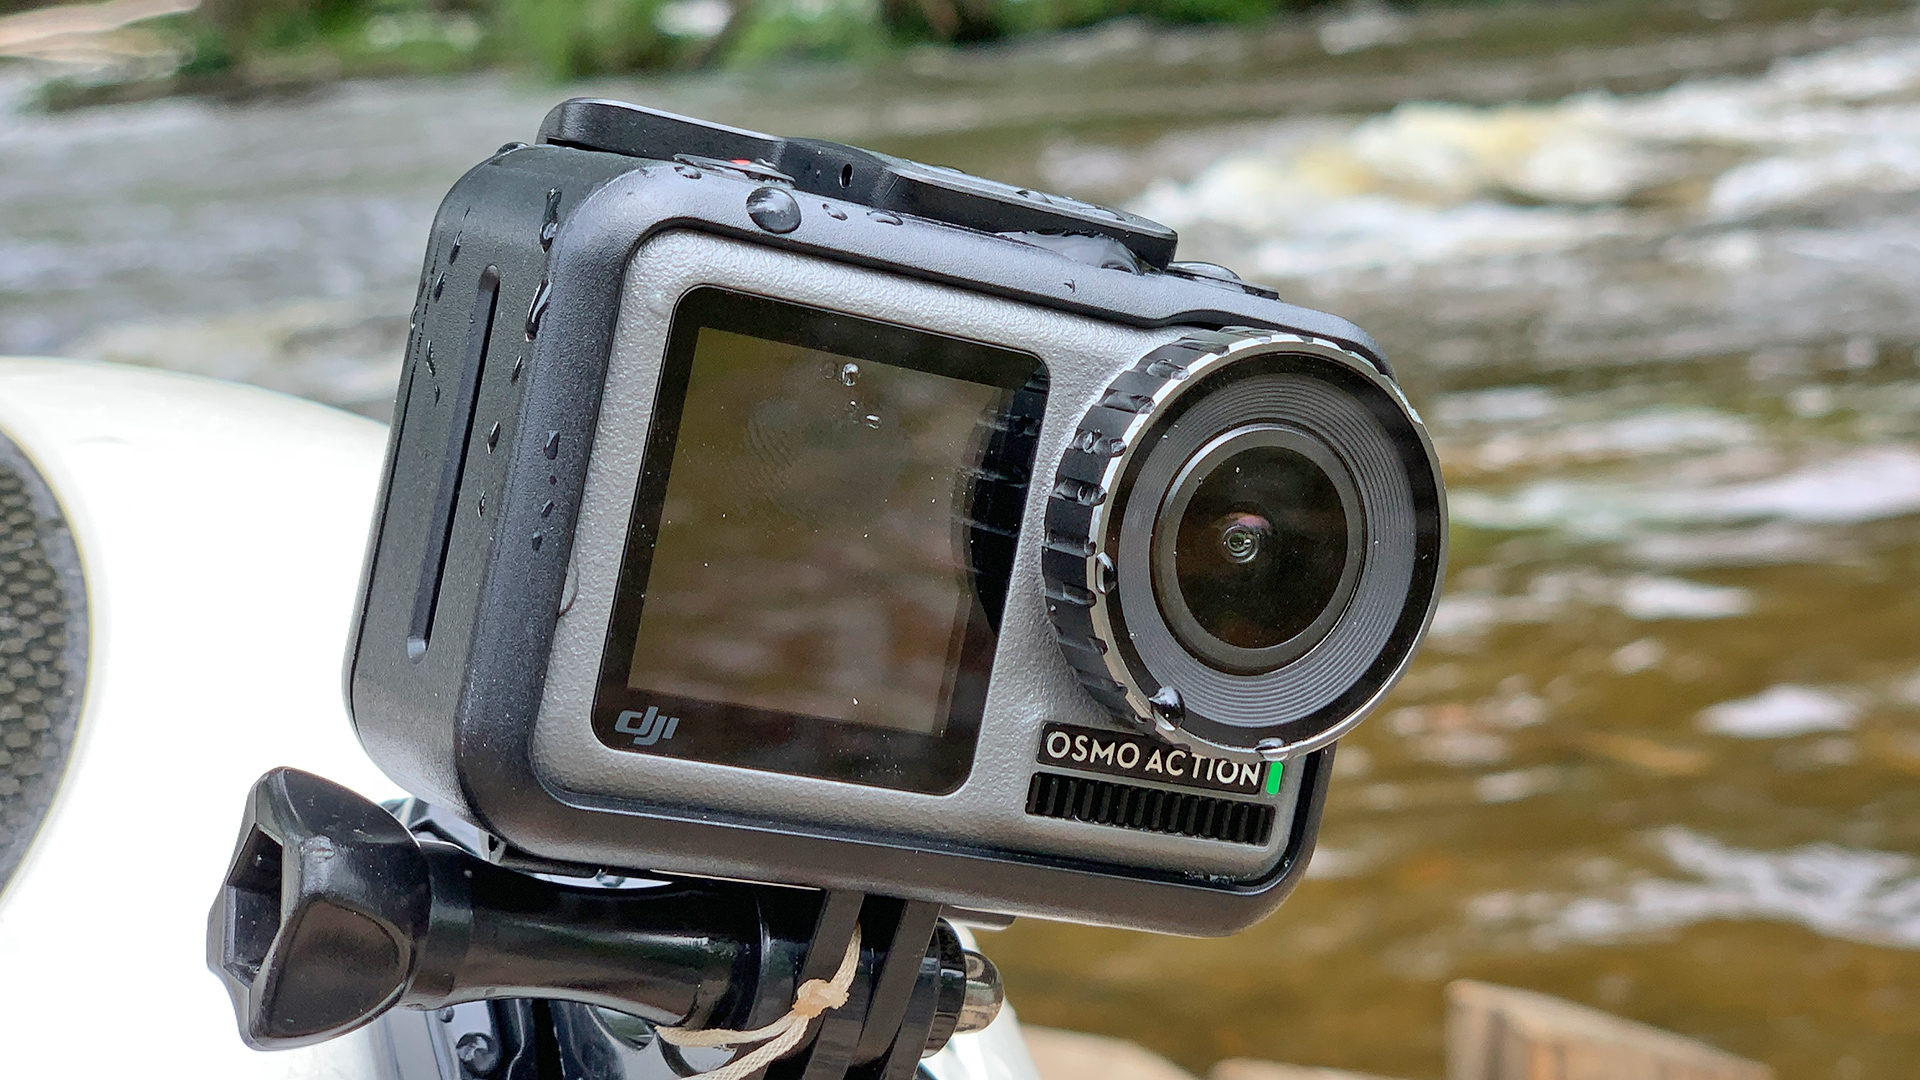 S What Happens When Dji And Gopro Go Head To Head - Video Camera , HD Wallpaper & Backgrounds